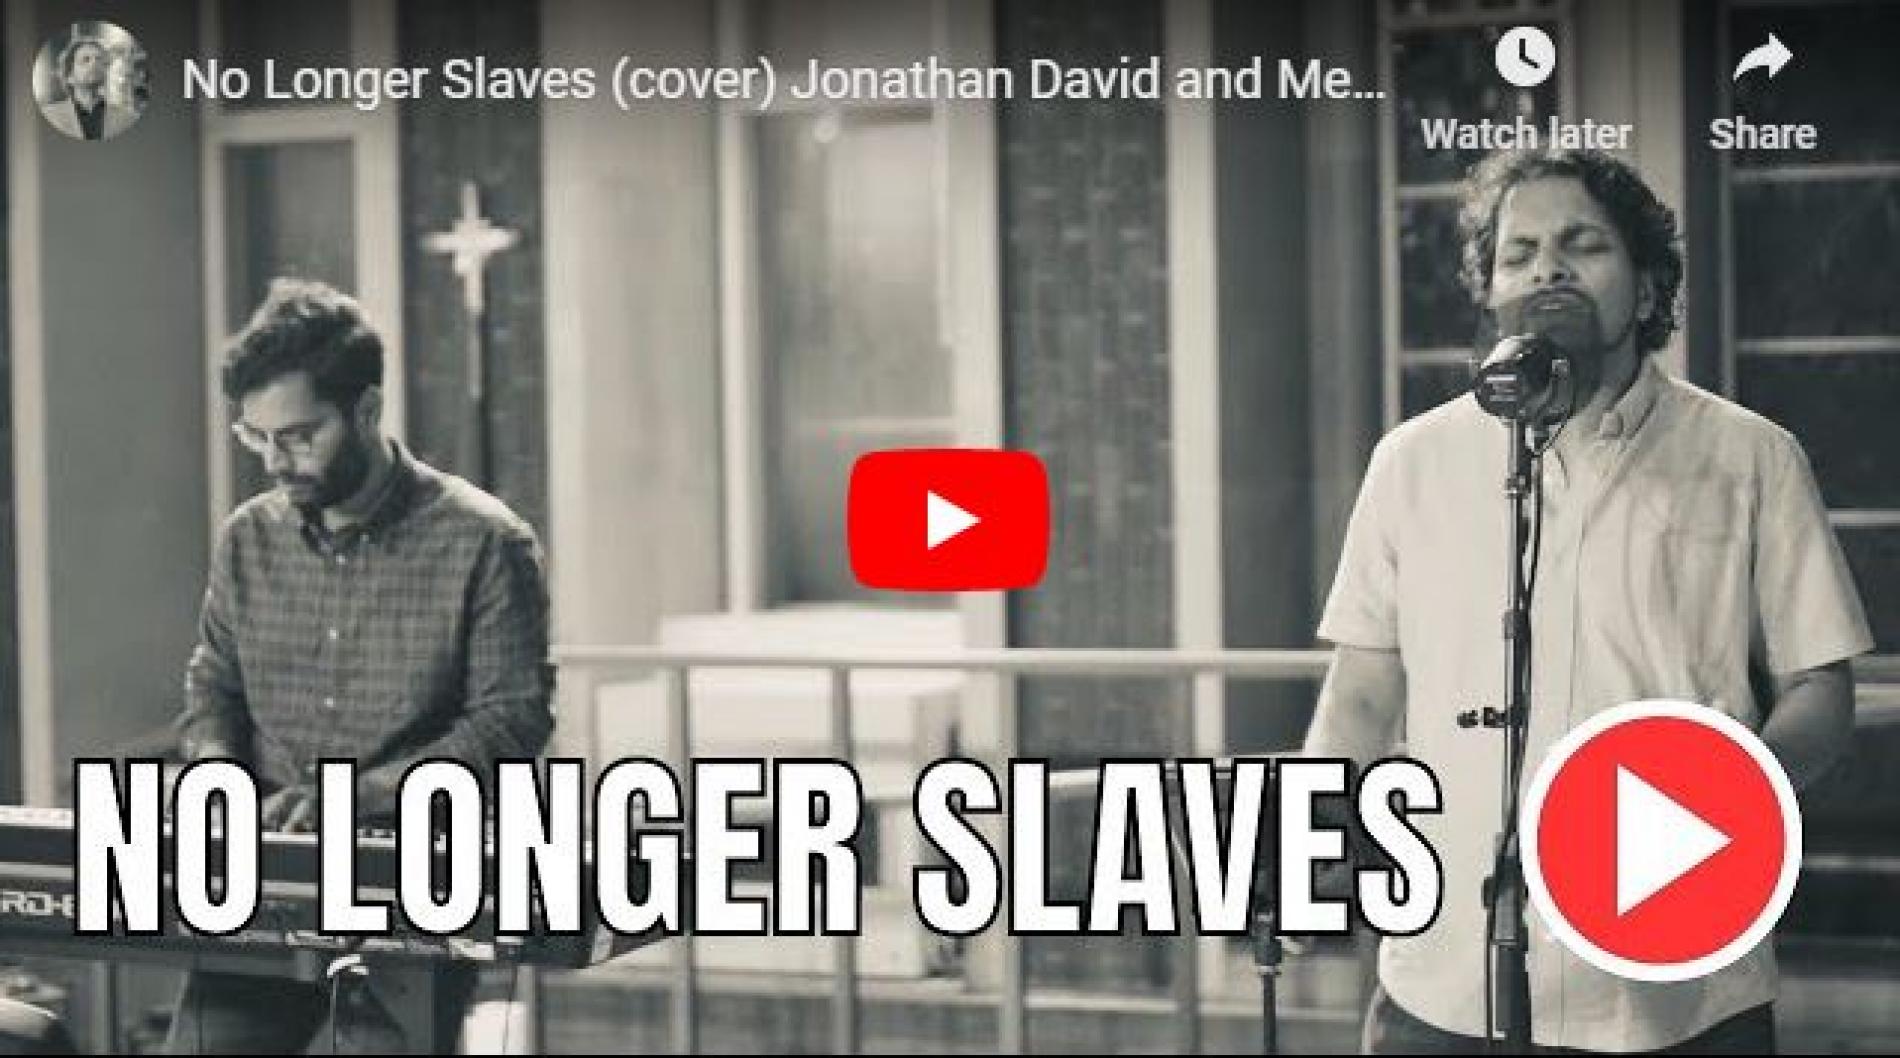 New Music : No Longer Slaves (cover) by Jerome Silva